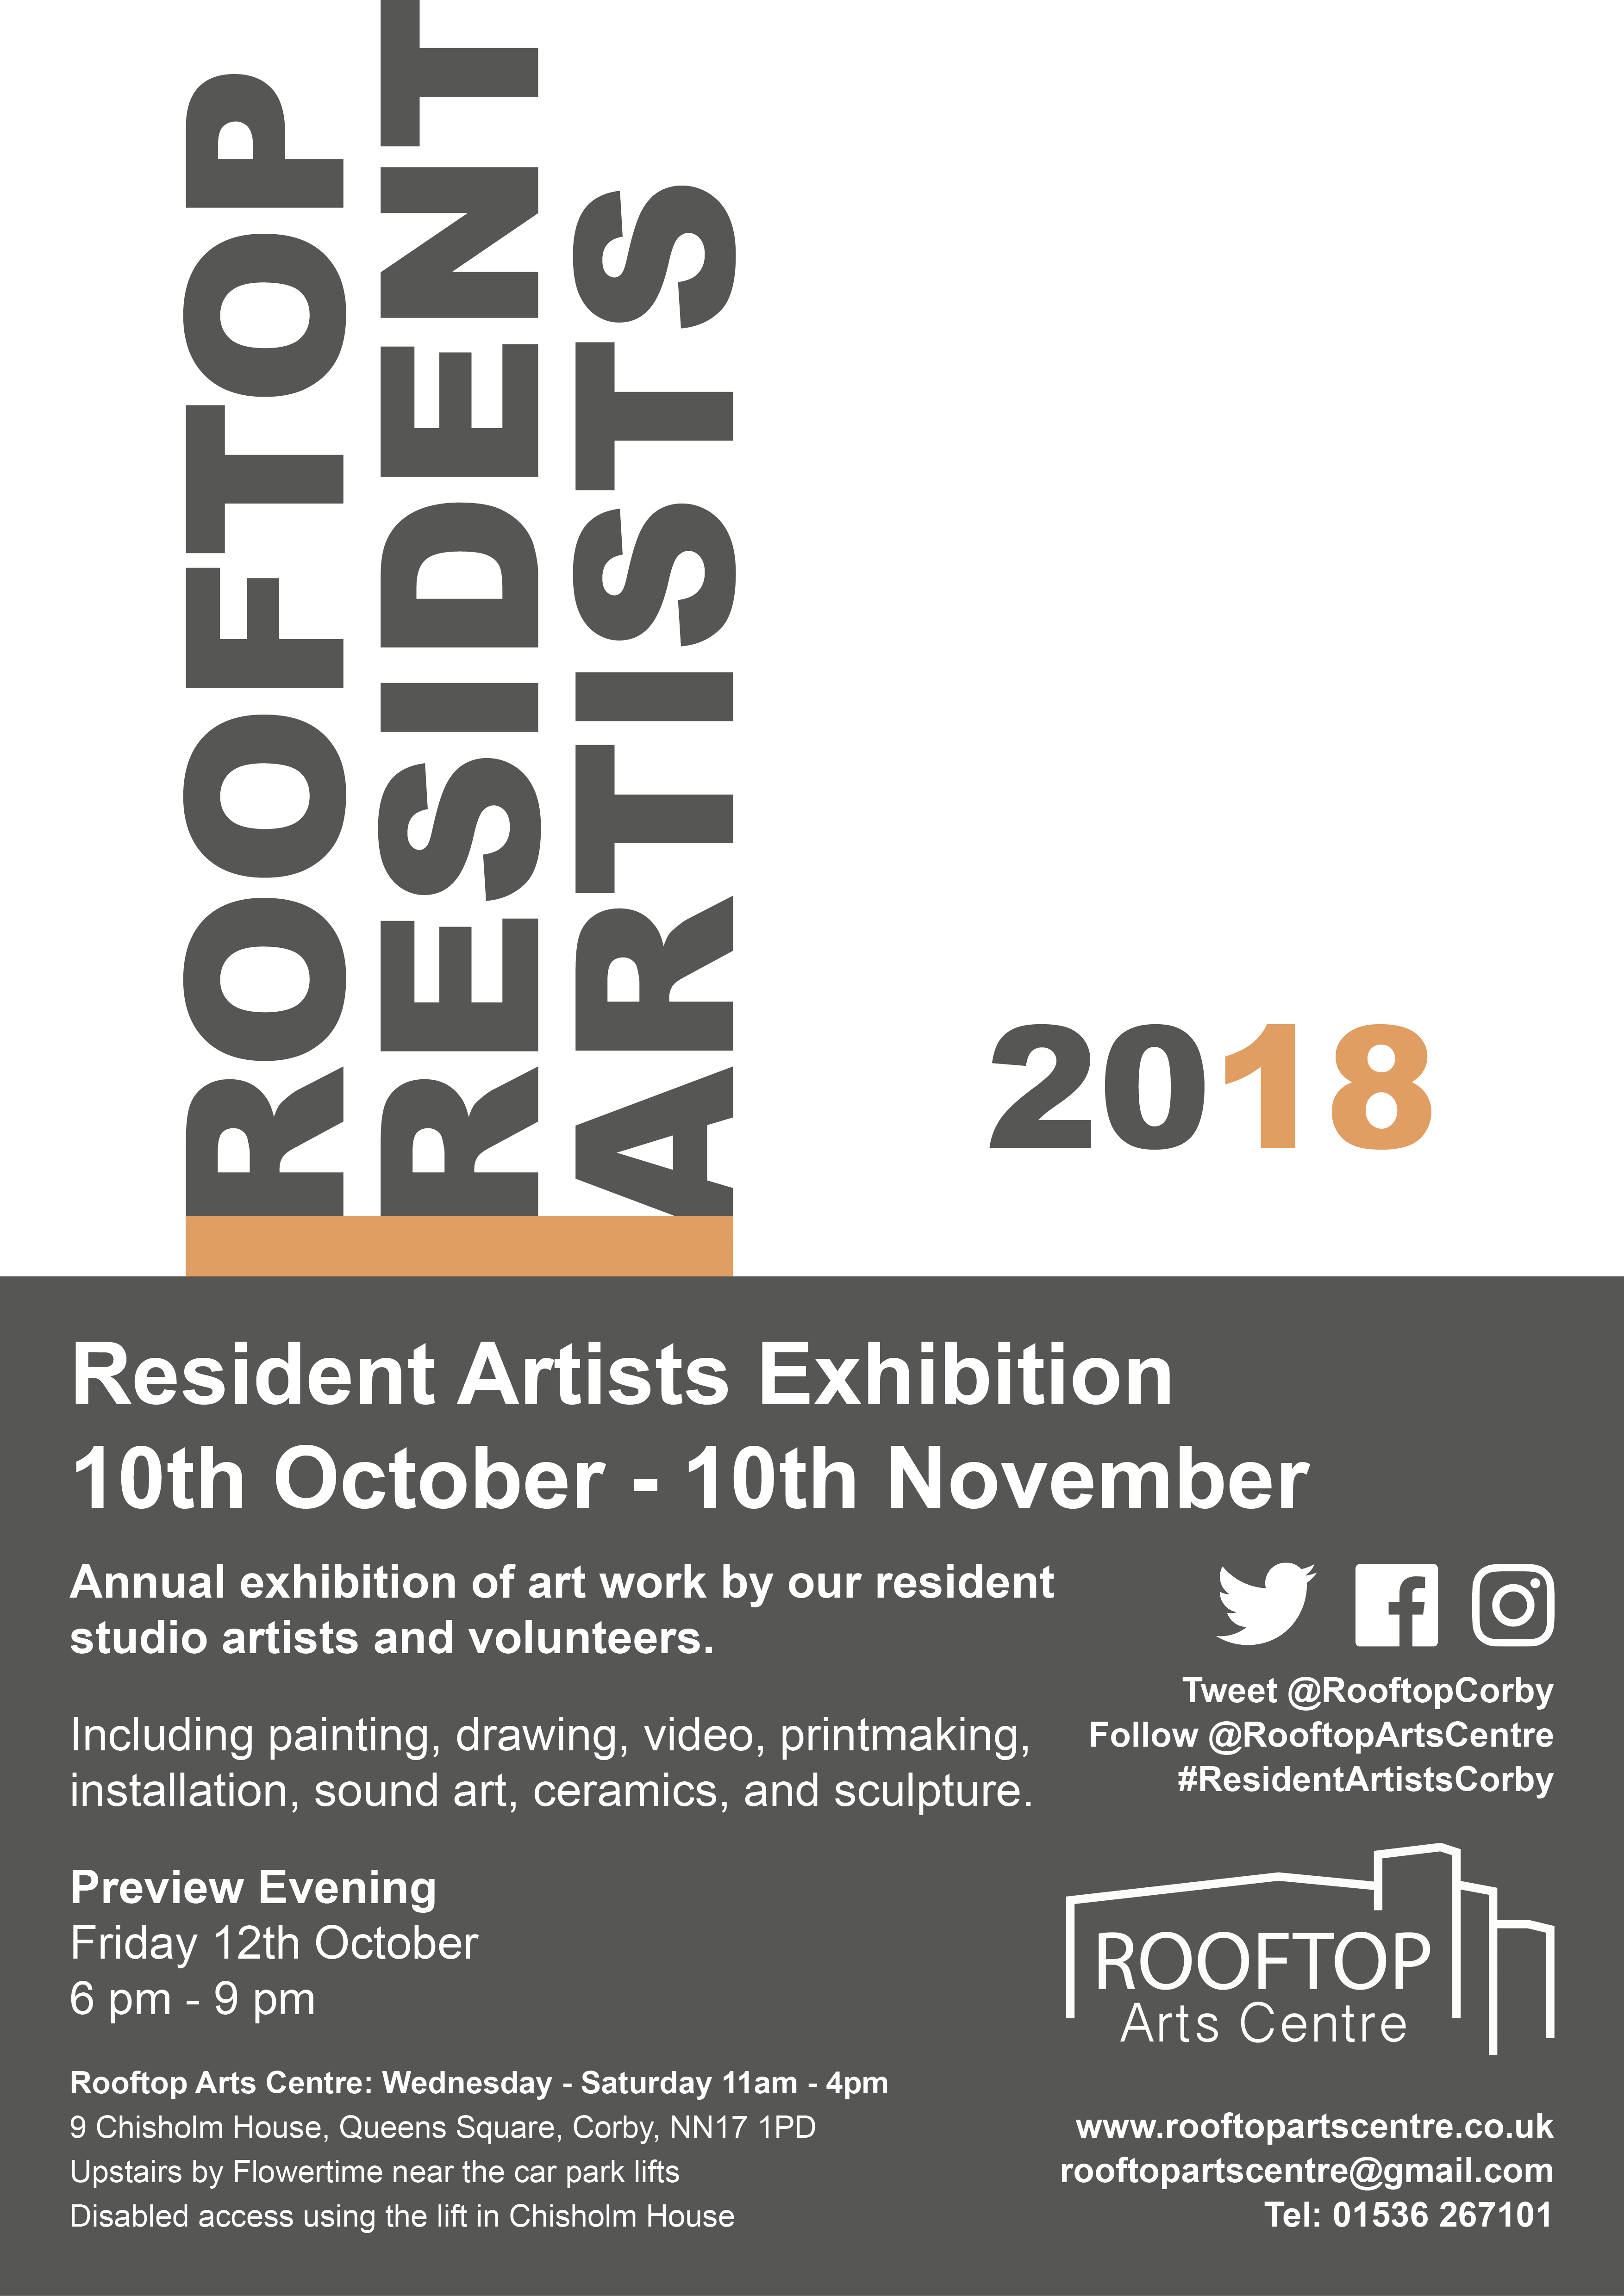 Poster for the Resident Artists Exhibition